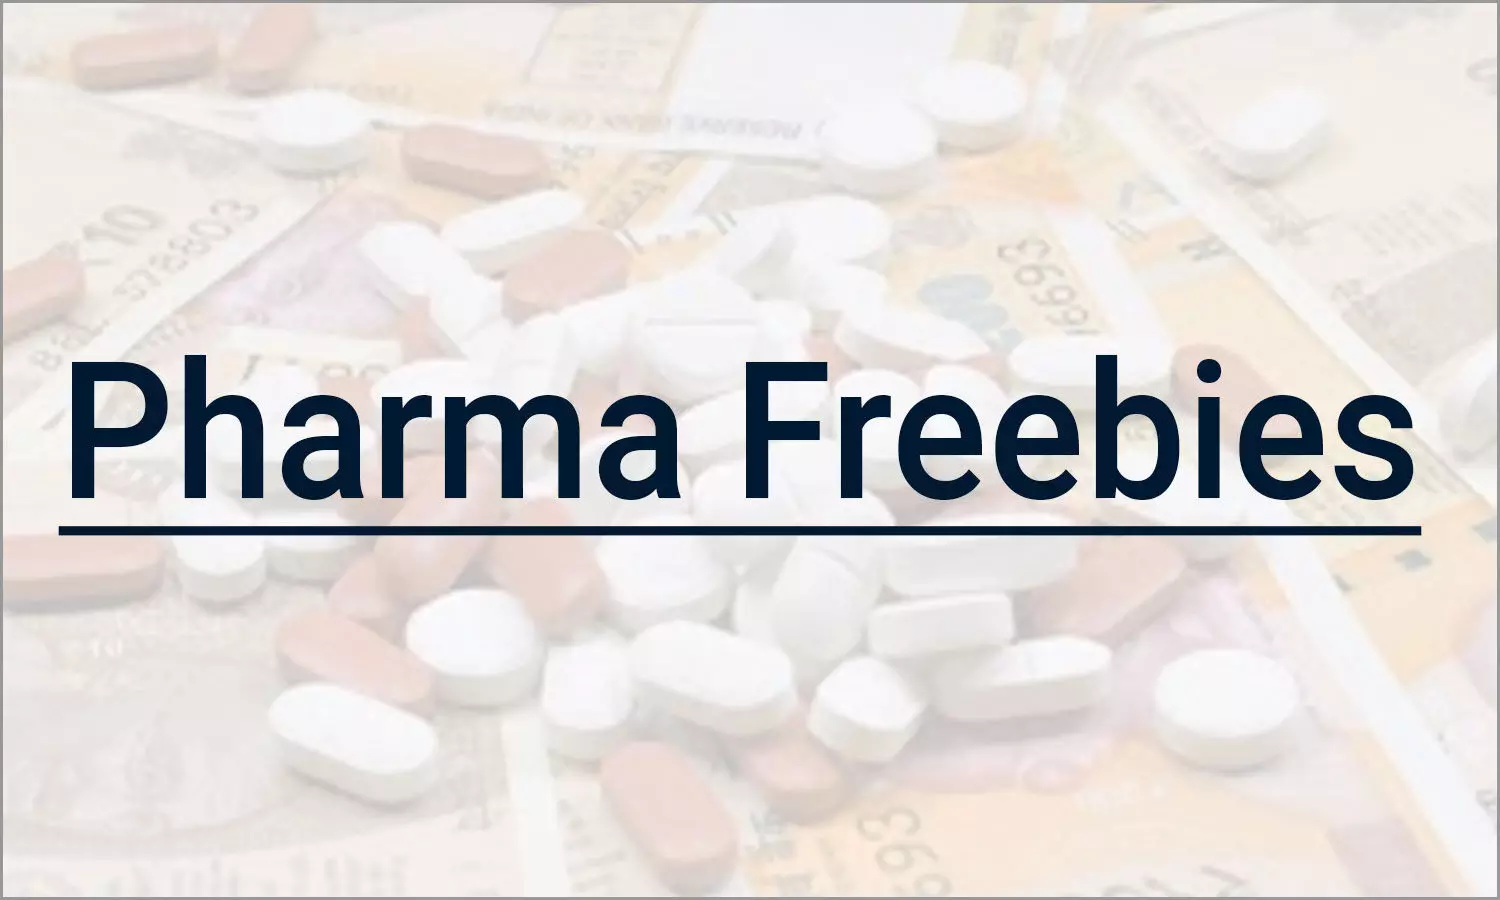 Its final: No tax exemption to pharma companies on giving freebies to doctors